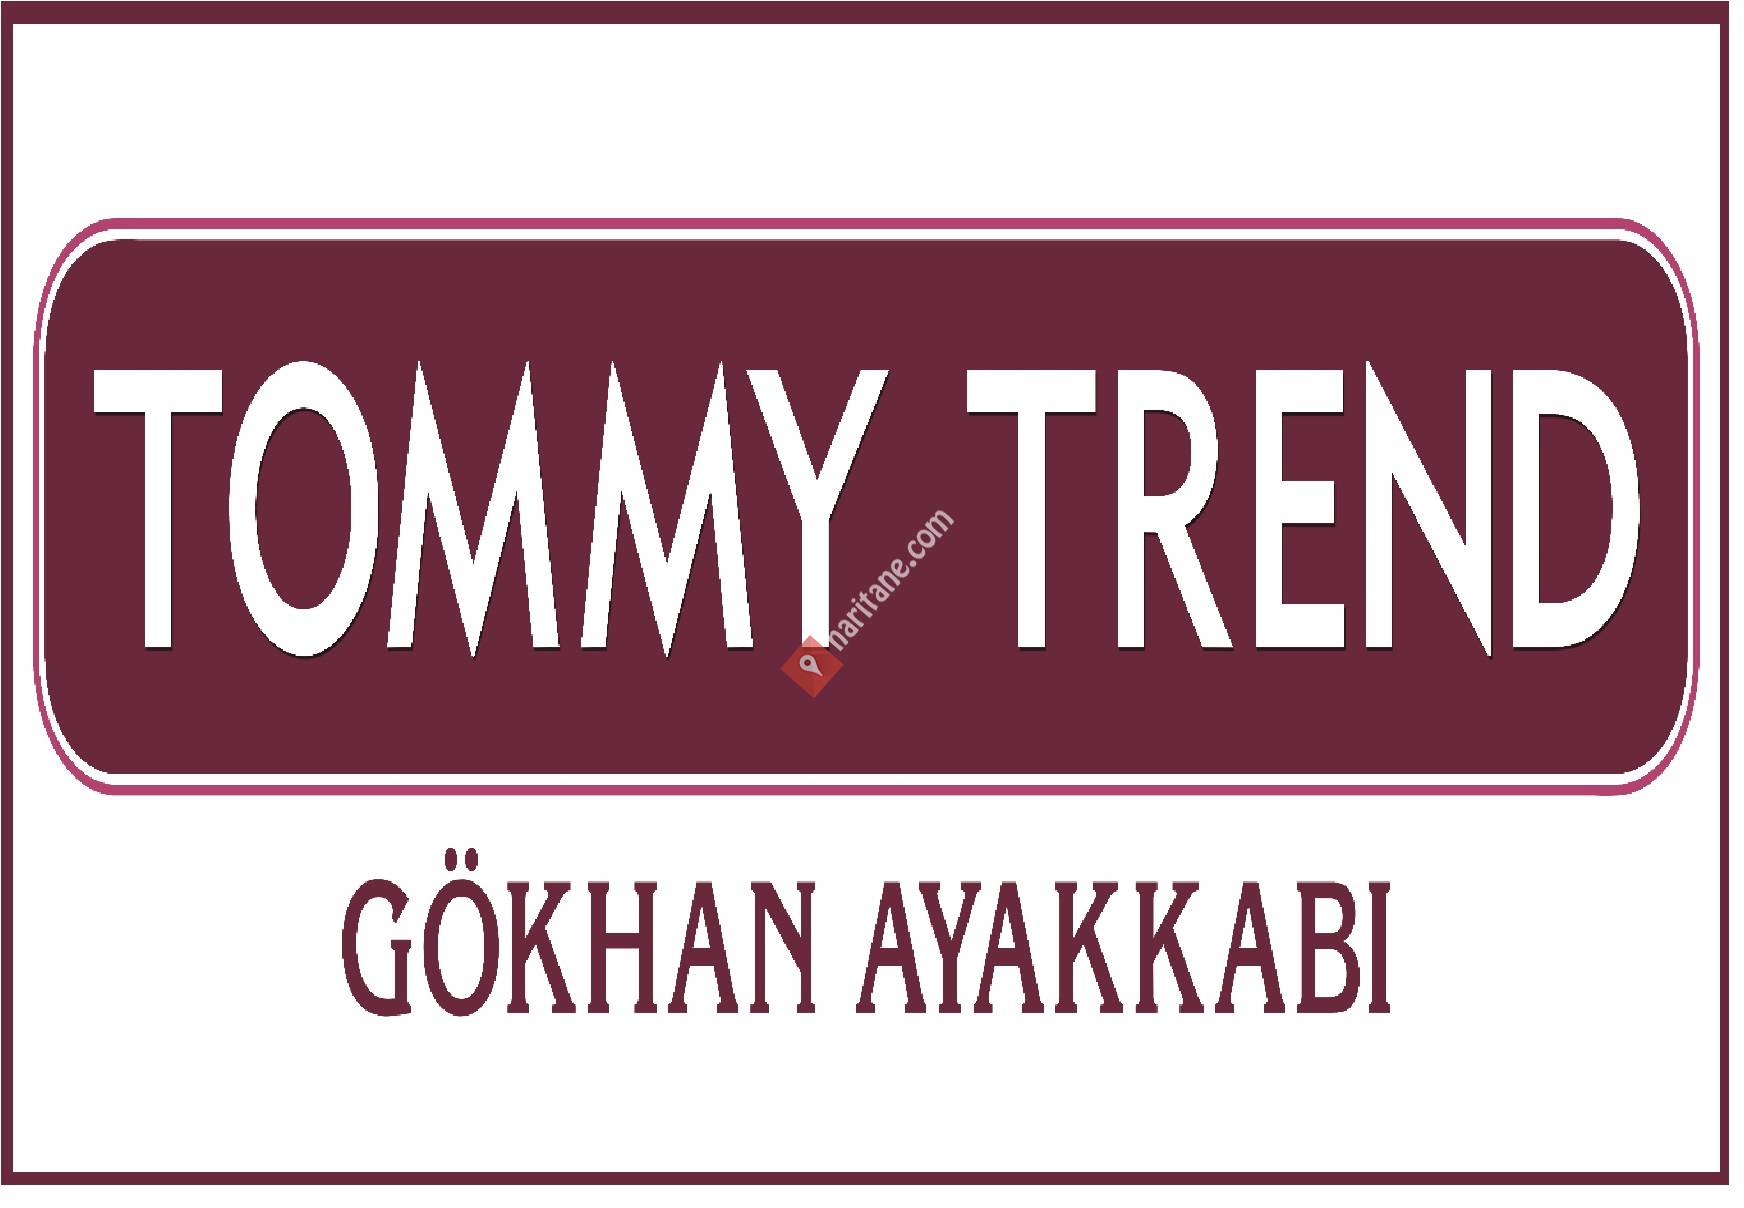 Tommy Trend